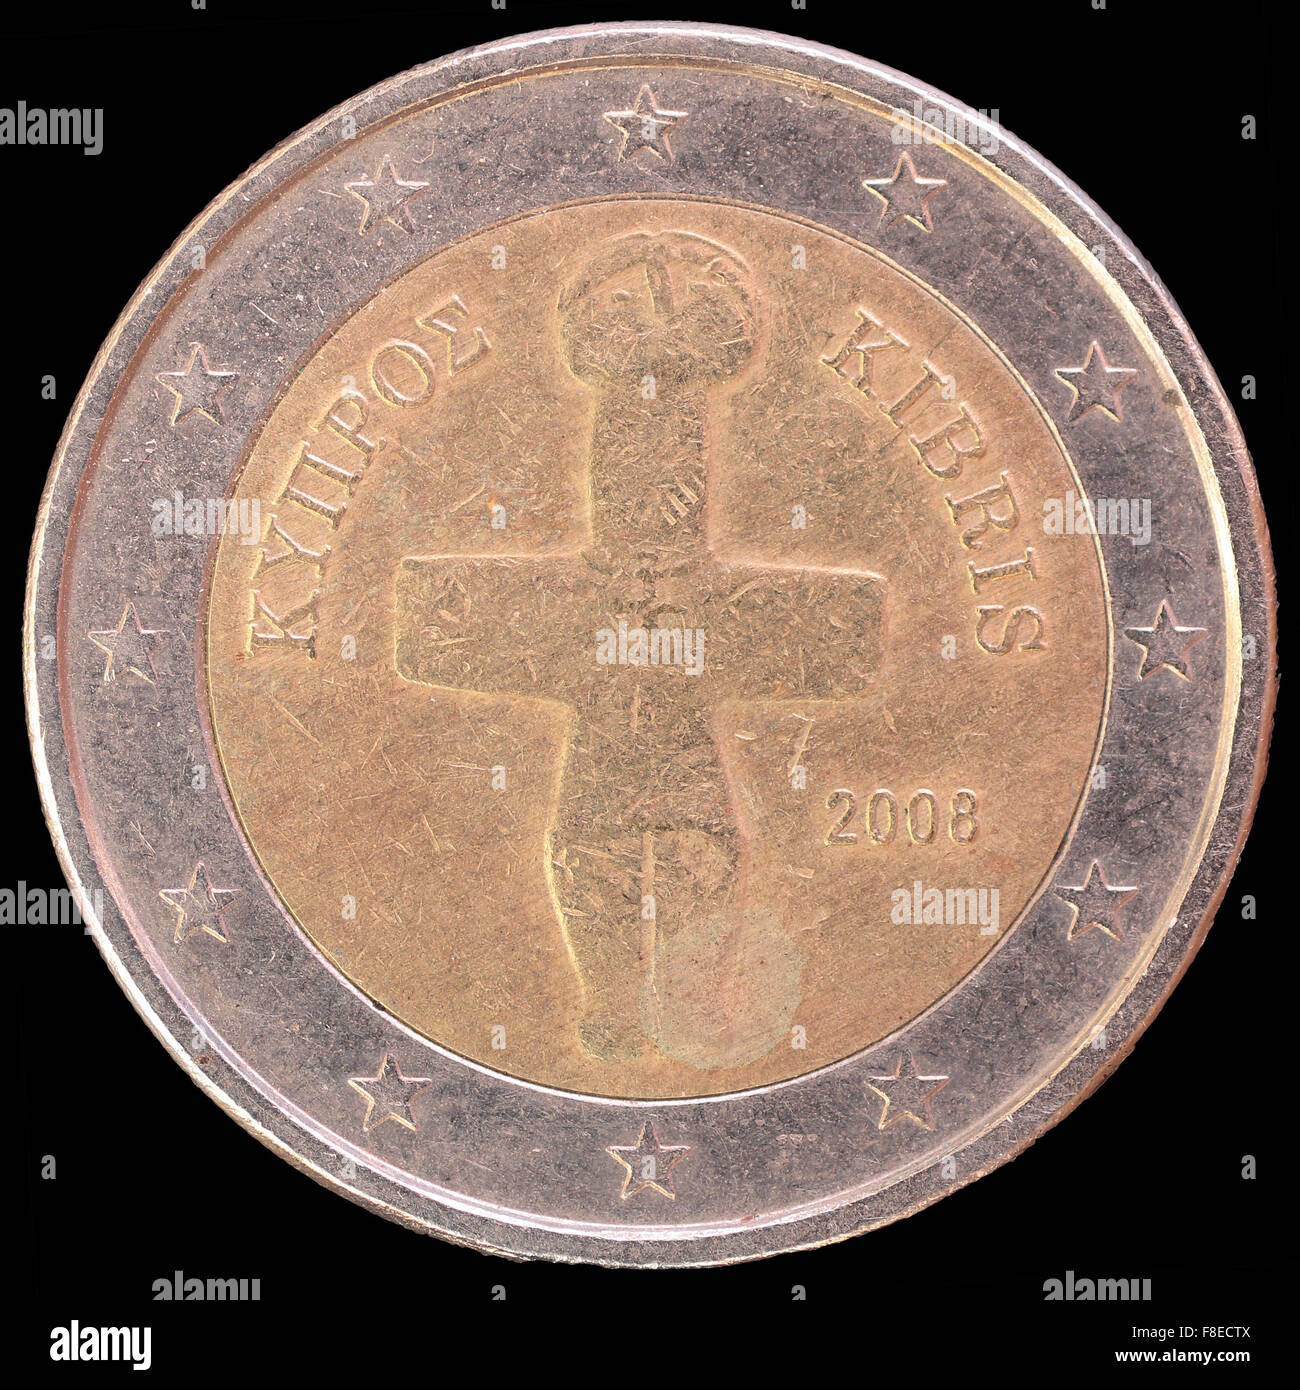 National side of two euro coin issued by Cyprus isolated on a black background. The cypriot obverse face depicts a cruciform ido Stock Photo